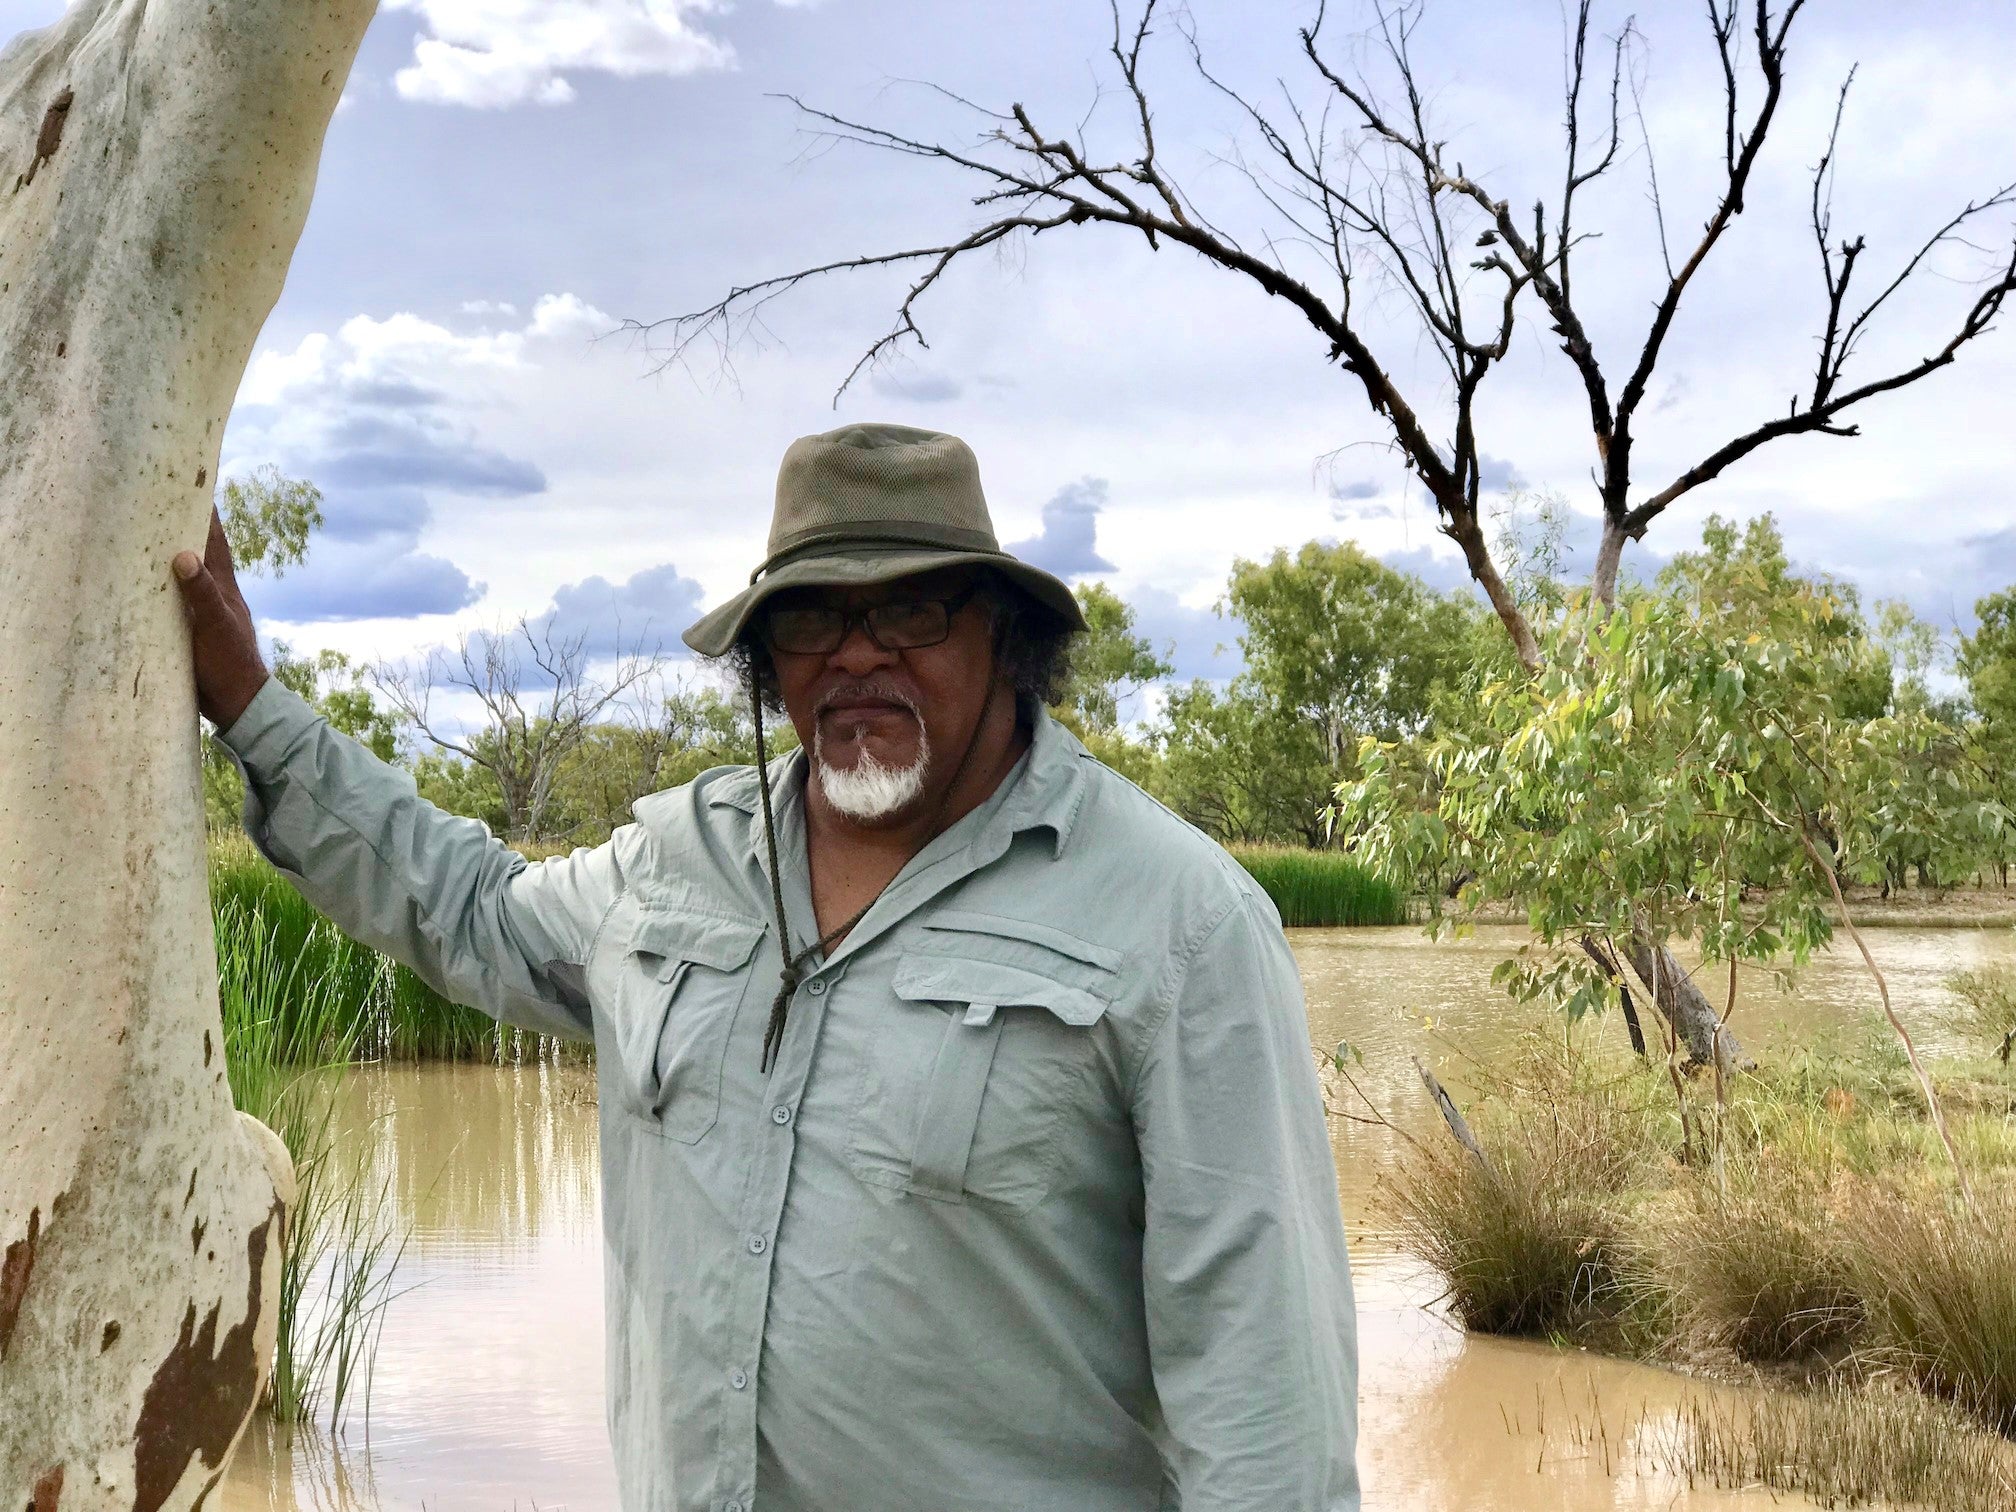 Wangan and Jagalingou cultural leader Adrian Burragubba visits Doongmabulla Springs, his people's most sacred site. The Wangan and Jagalingou are fighting a proposed coal mine that would likely destroy the springs.